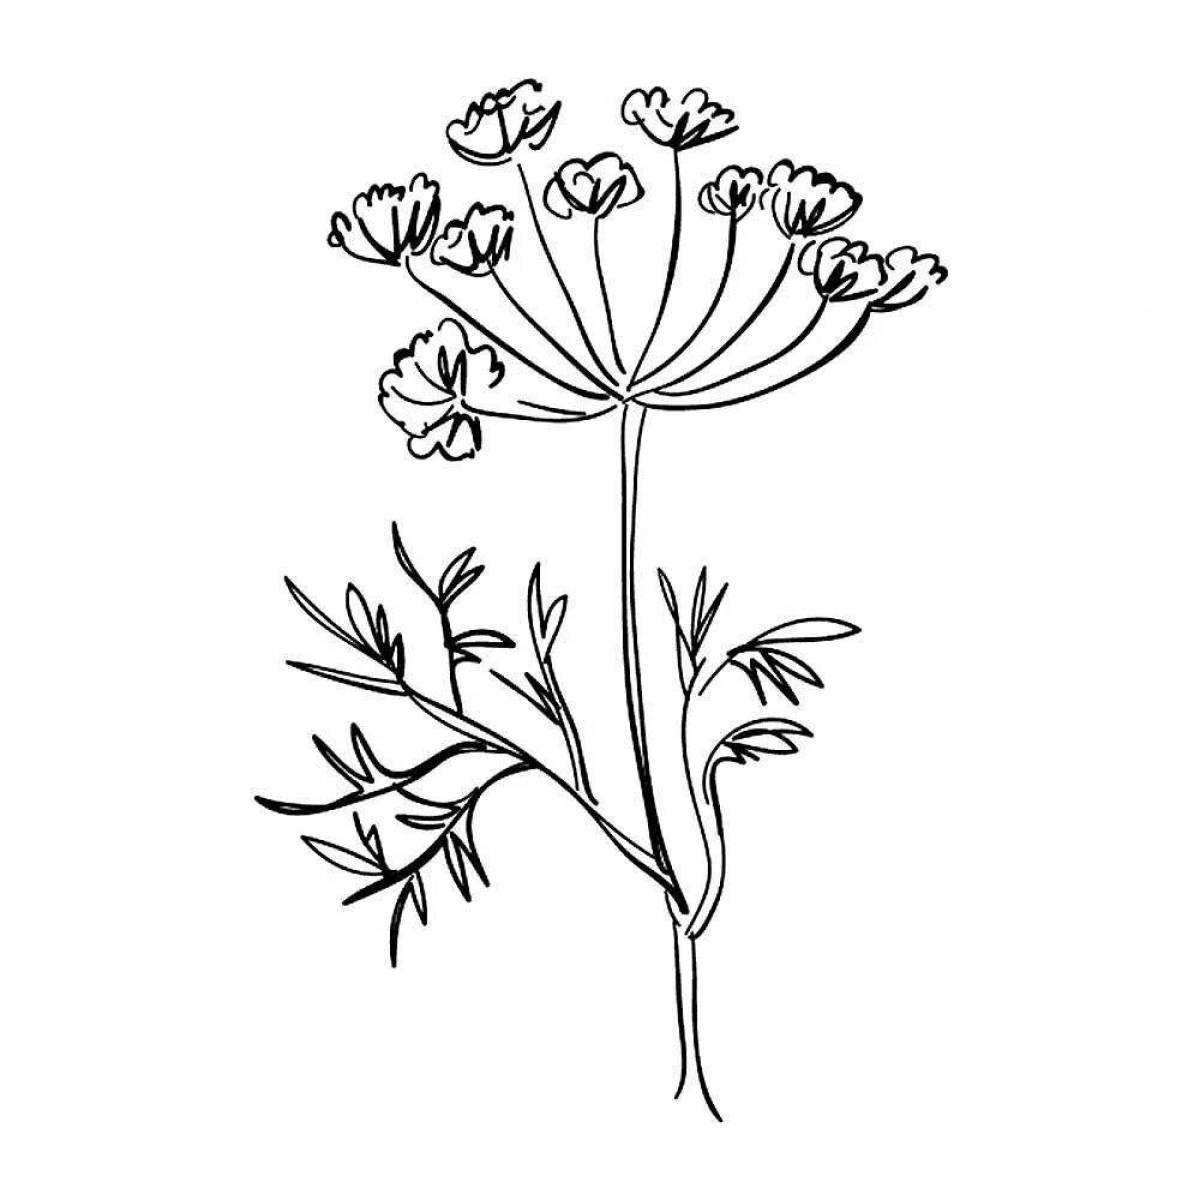 Coloring page glamor hogweed